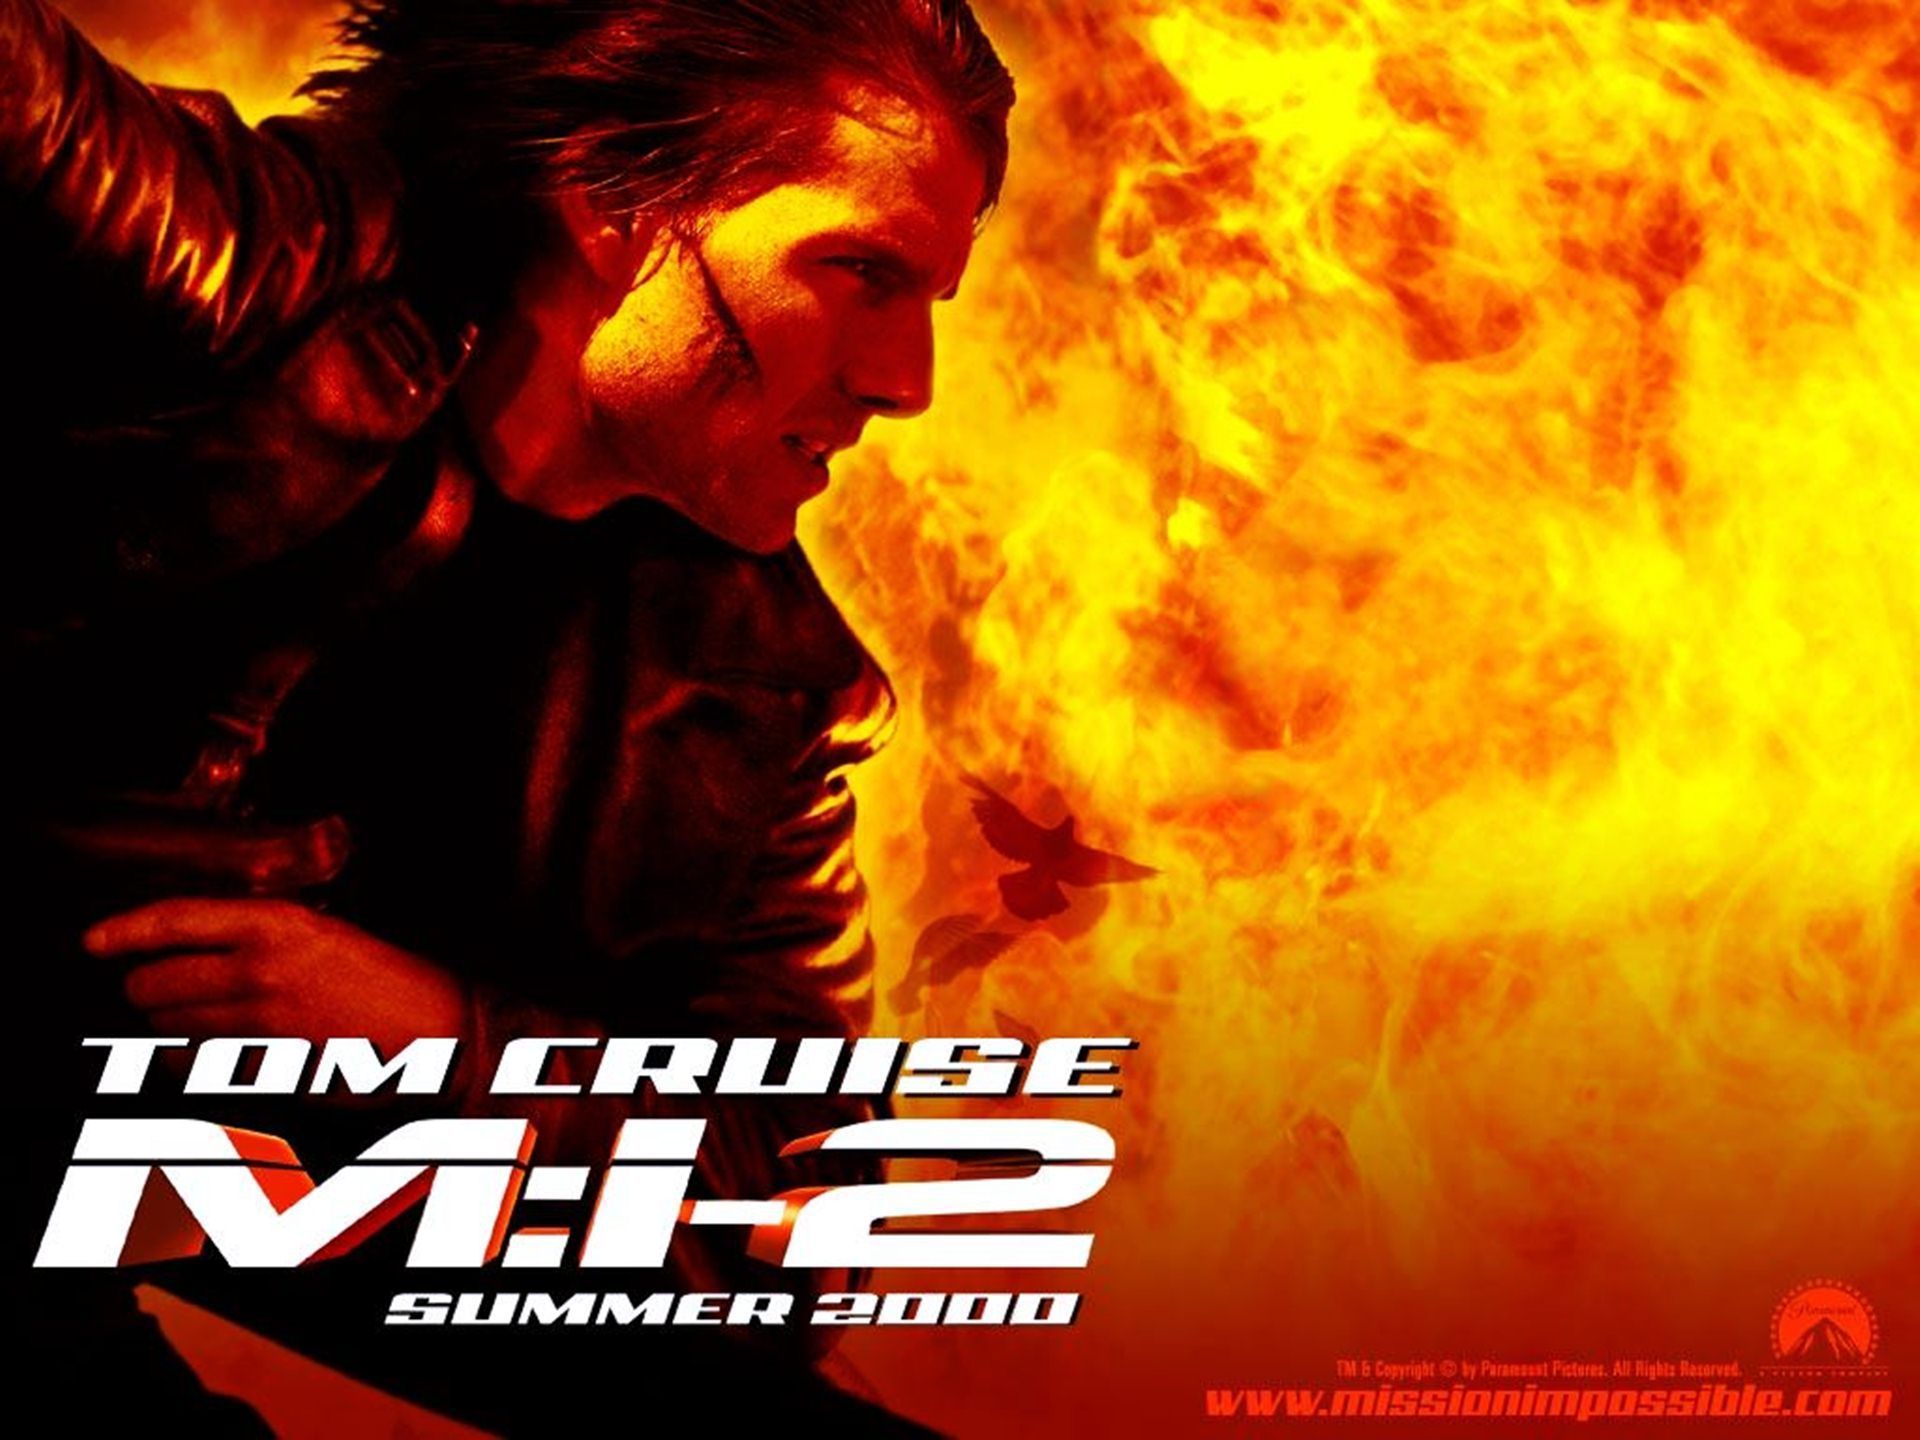 Here's why Mission: Impossible 2 was the most important film